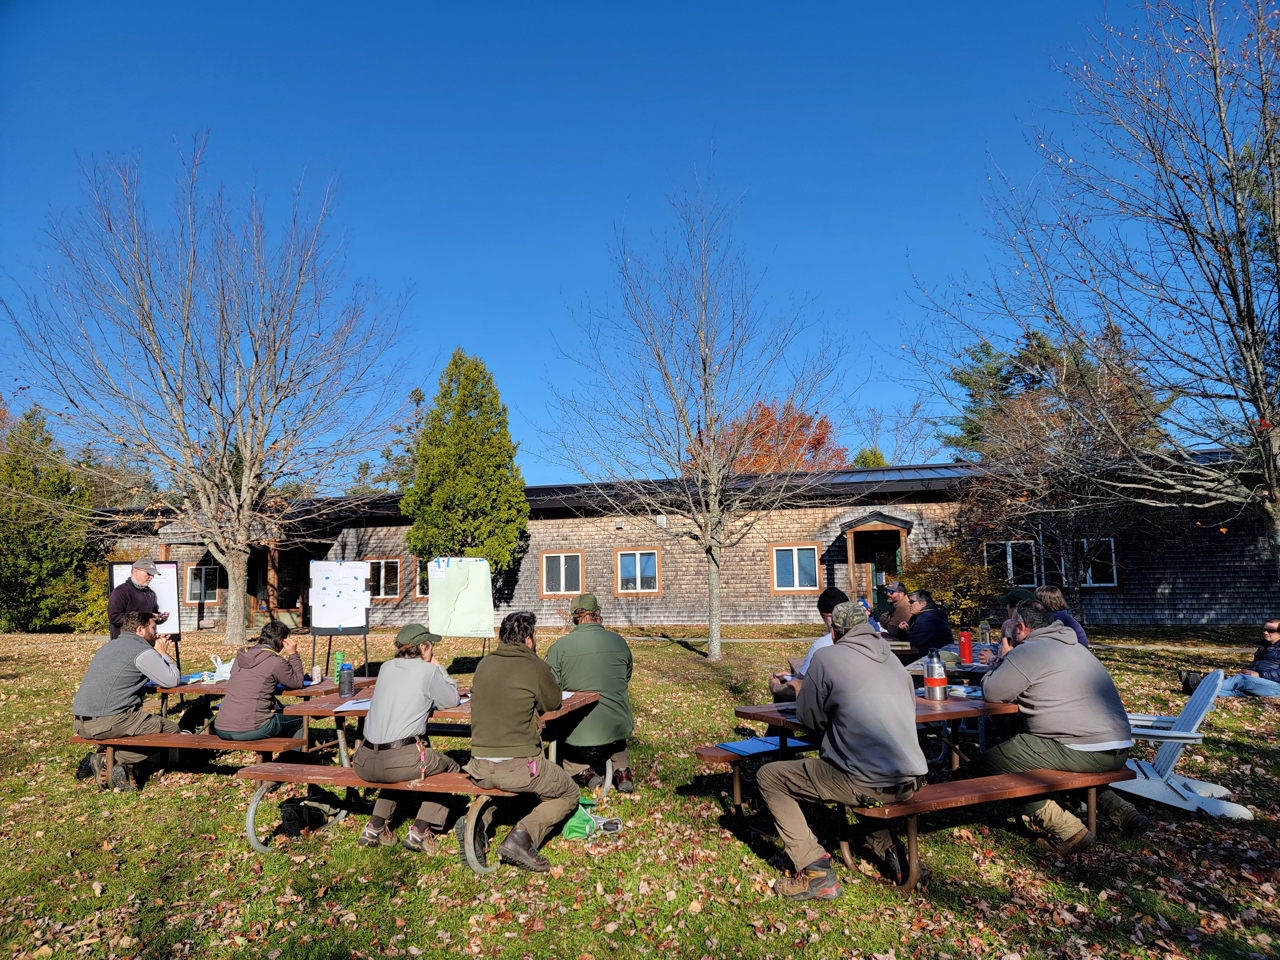 On a green lawn strewn with fallen leaves, a group of people, some in National Park Service uniforms, sitting at picnic tables in a half-circle, facing three easels where a person stands taking notes. The cedar-shingled park headquarters building and trees are in the background.